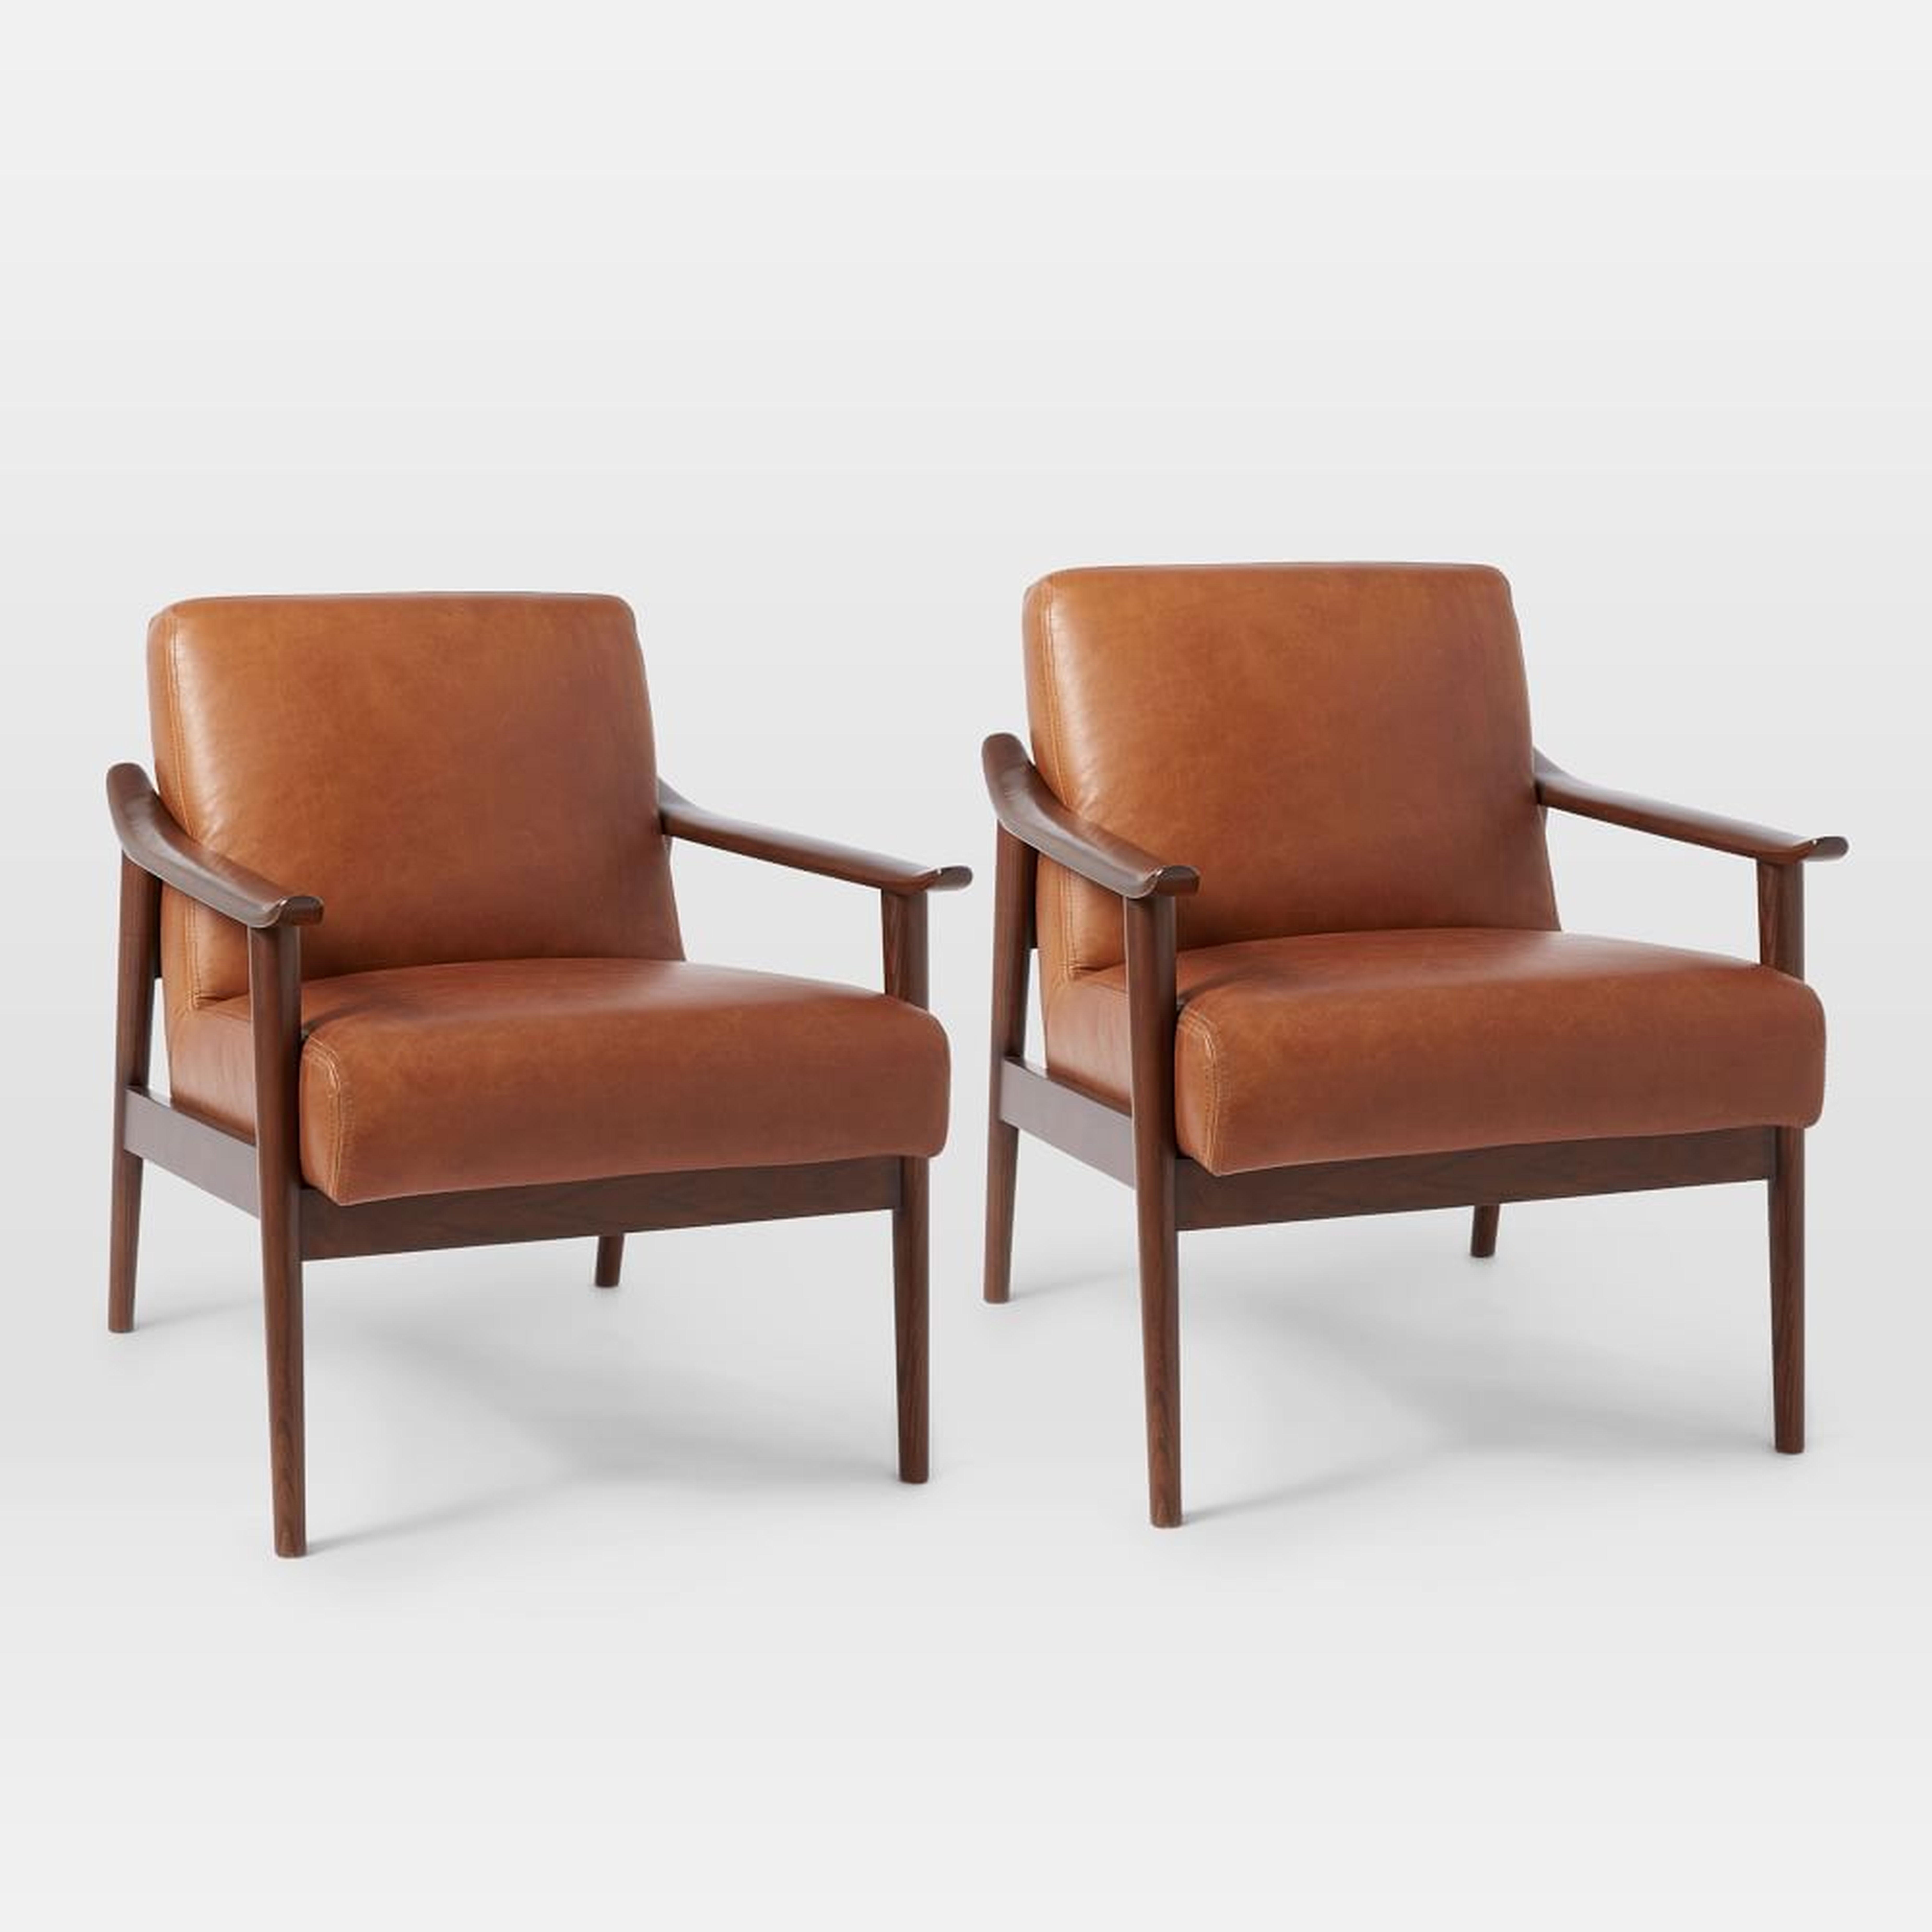 Midcentury Show Wood Leather Chair, Saddle Leather, Nut, Espresso, Set of 2 - West Elm